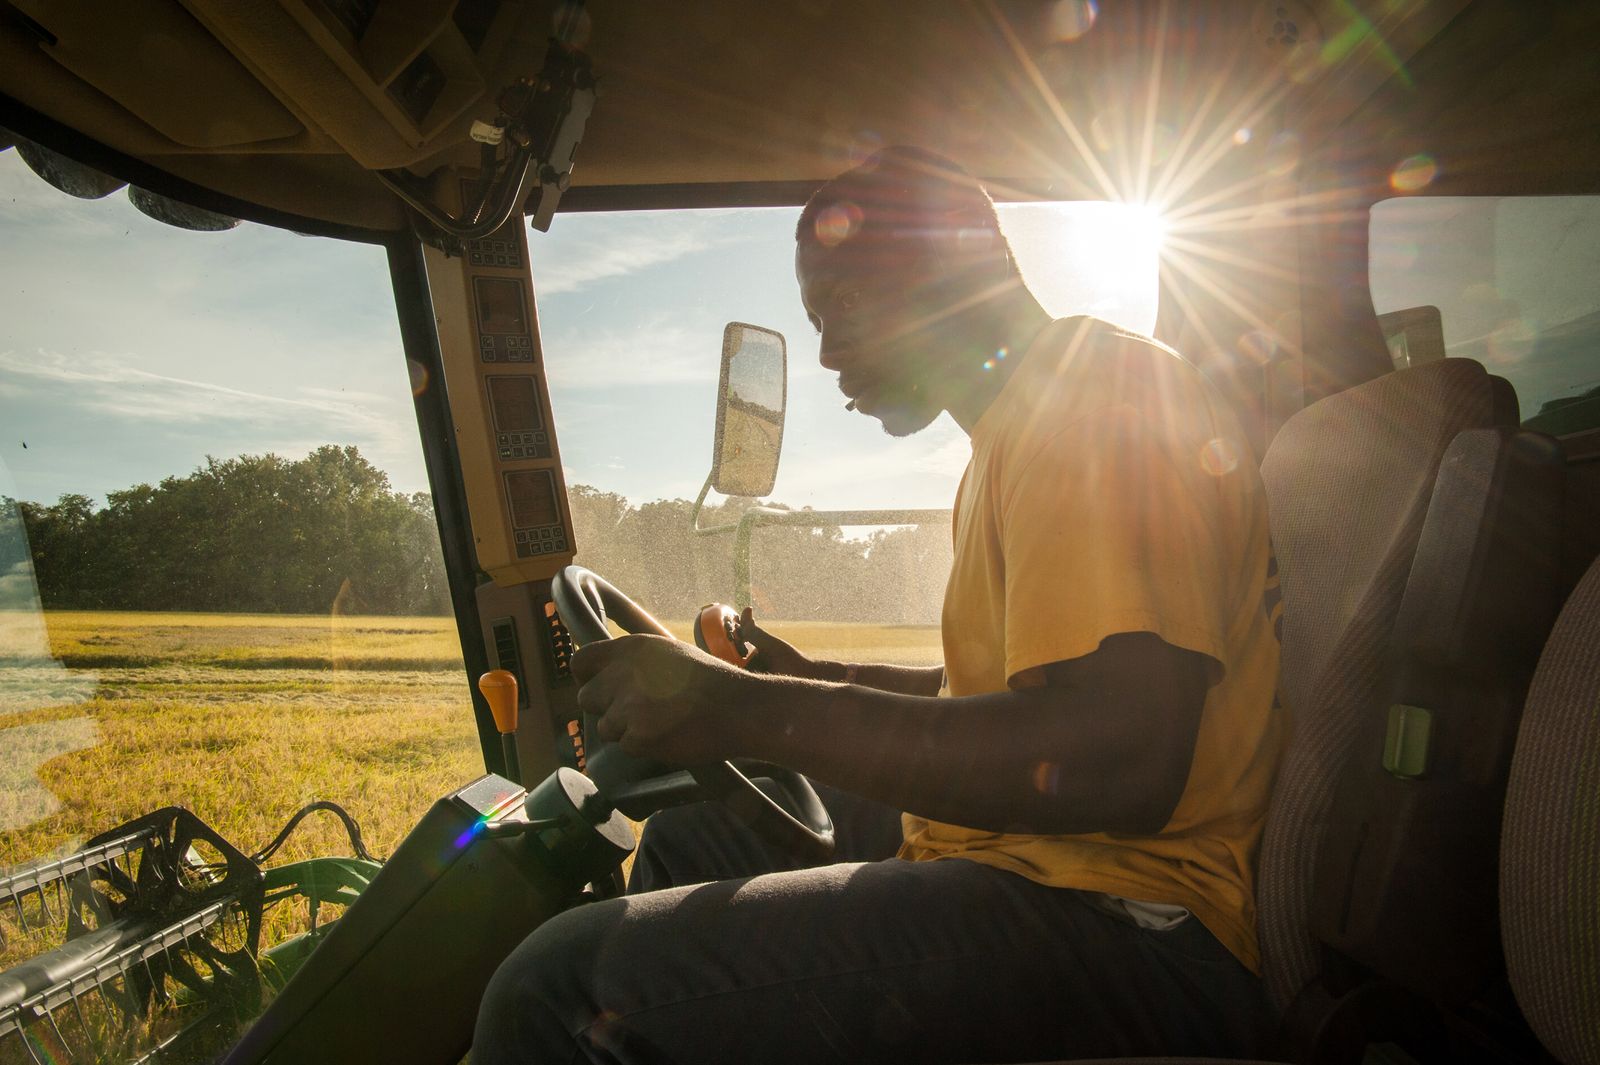 © Rory Doyle - Jerry Evans Jr. harvests rice at his family’s farm in Symonds, Mississippi.